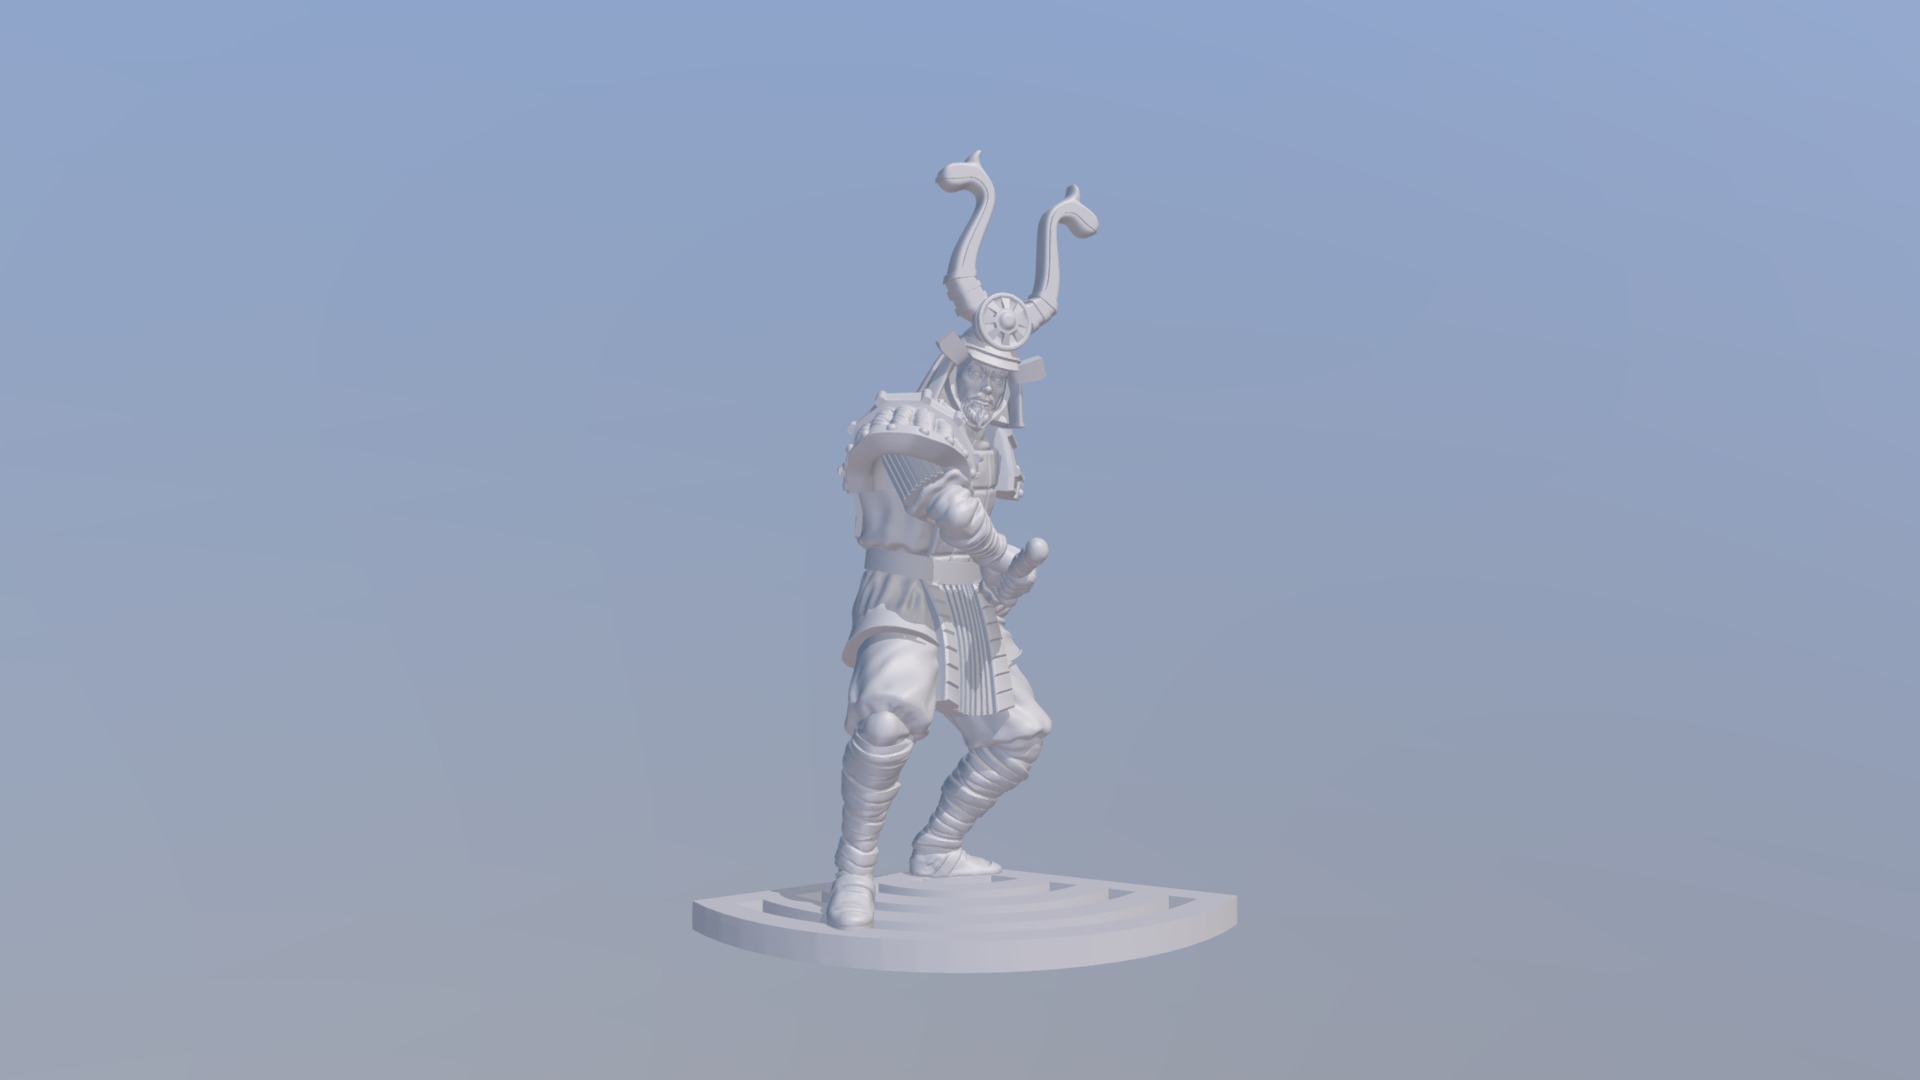 Samurai miniature model for Shadow Tactics board game by Antler Games.

Learn more at: https://antlergames.com/shadowtactics/ - Samurai - Shadow Tactics board game - 3D model by antlergames 3d model